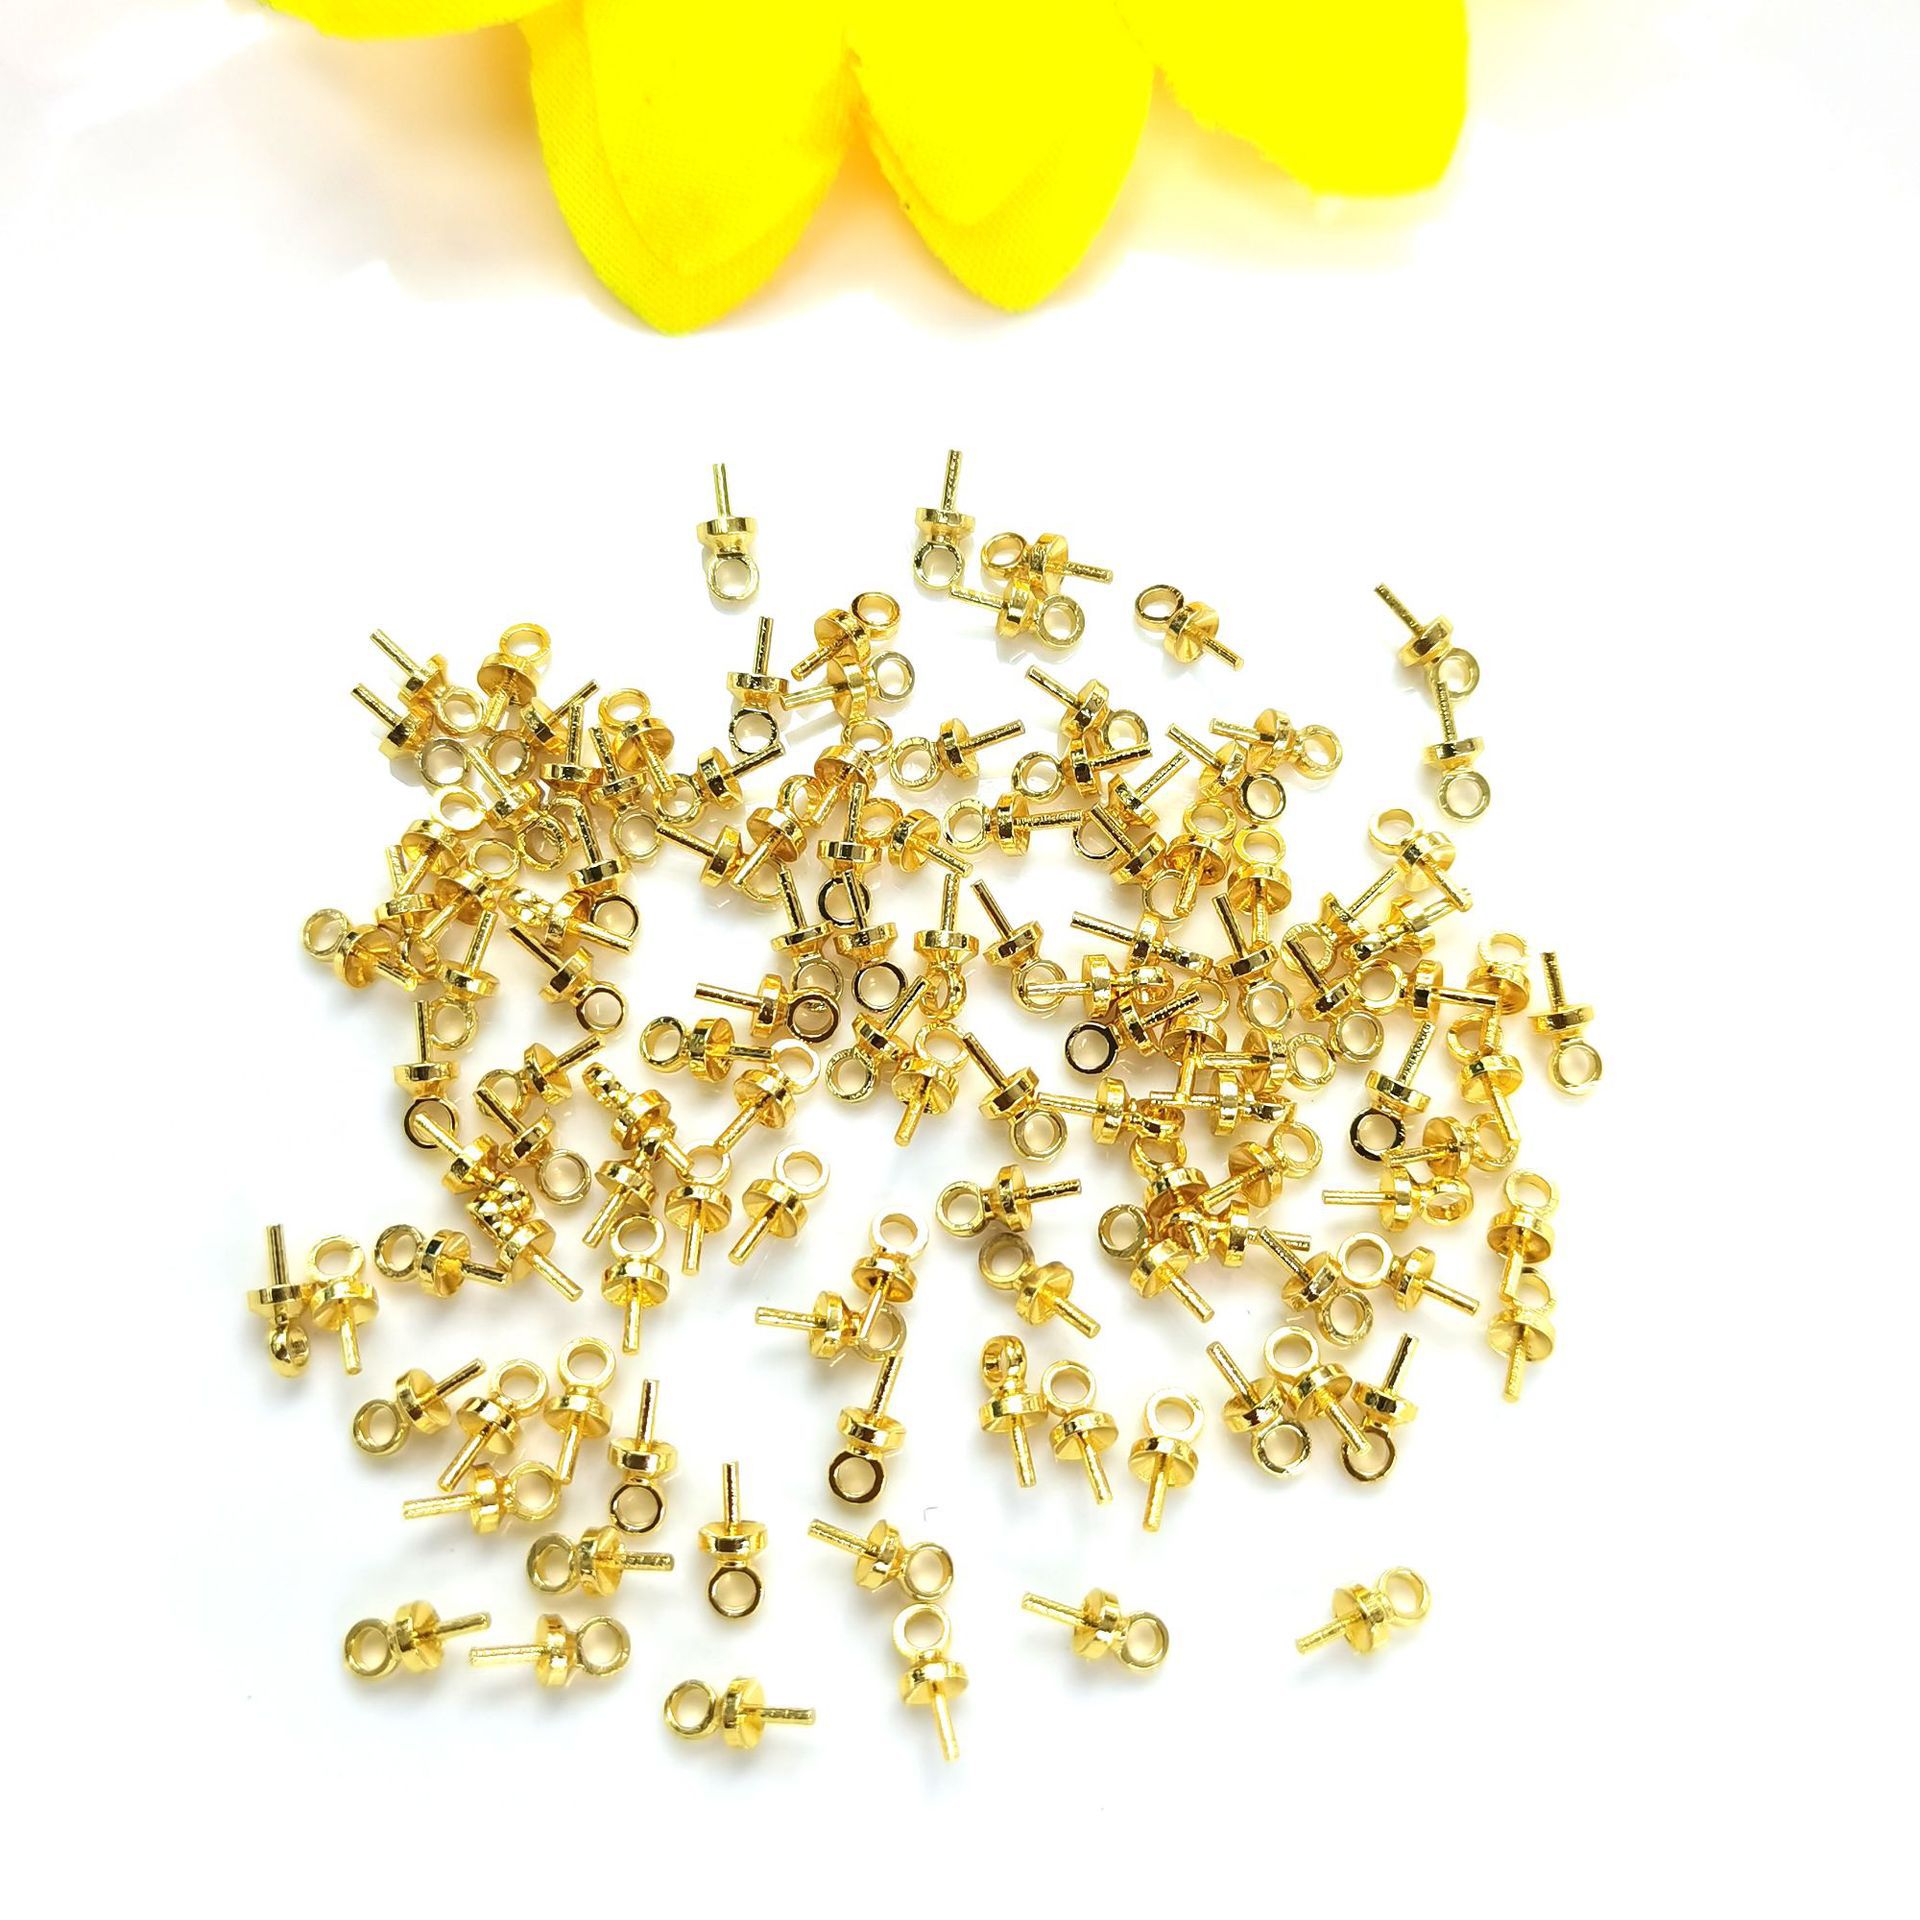 Gold 3mm